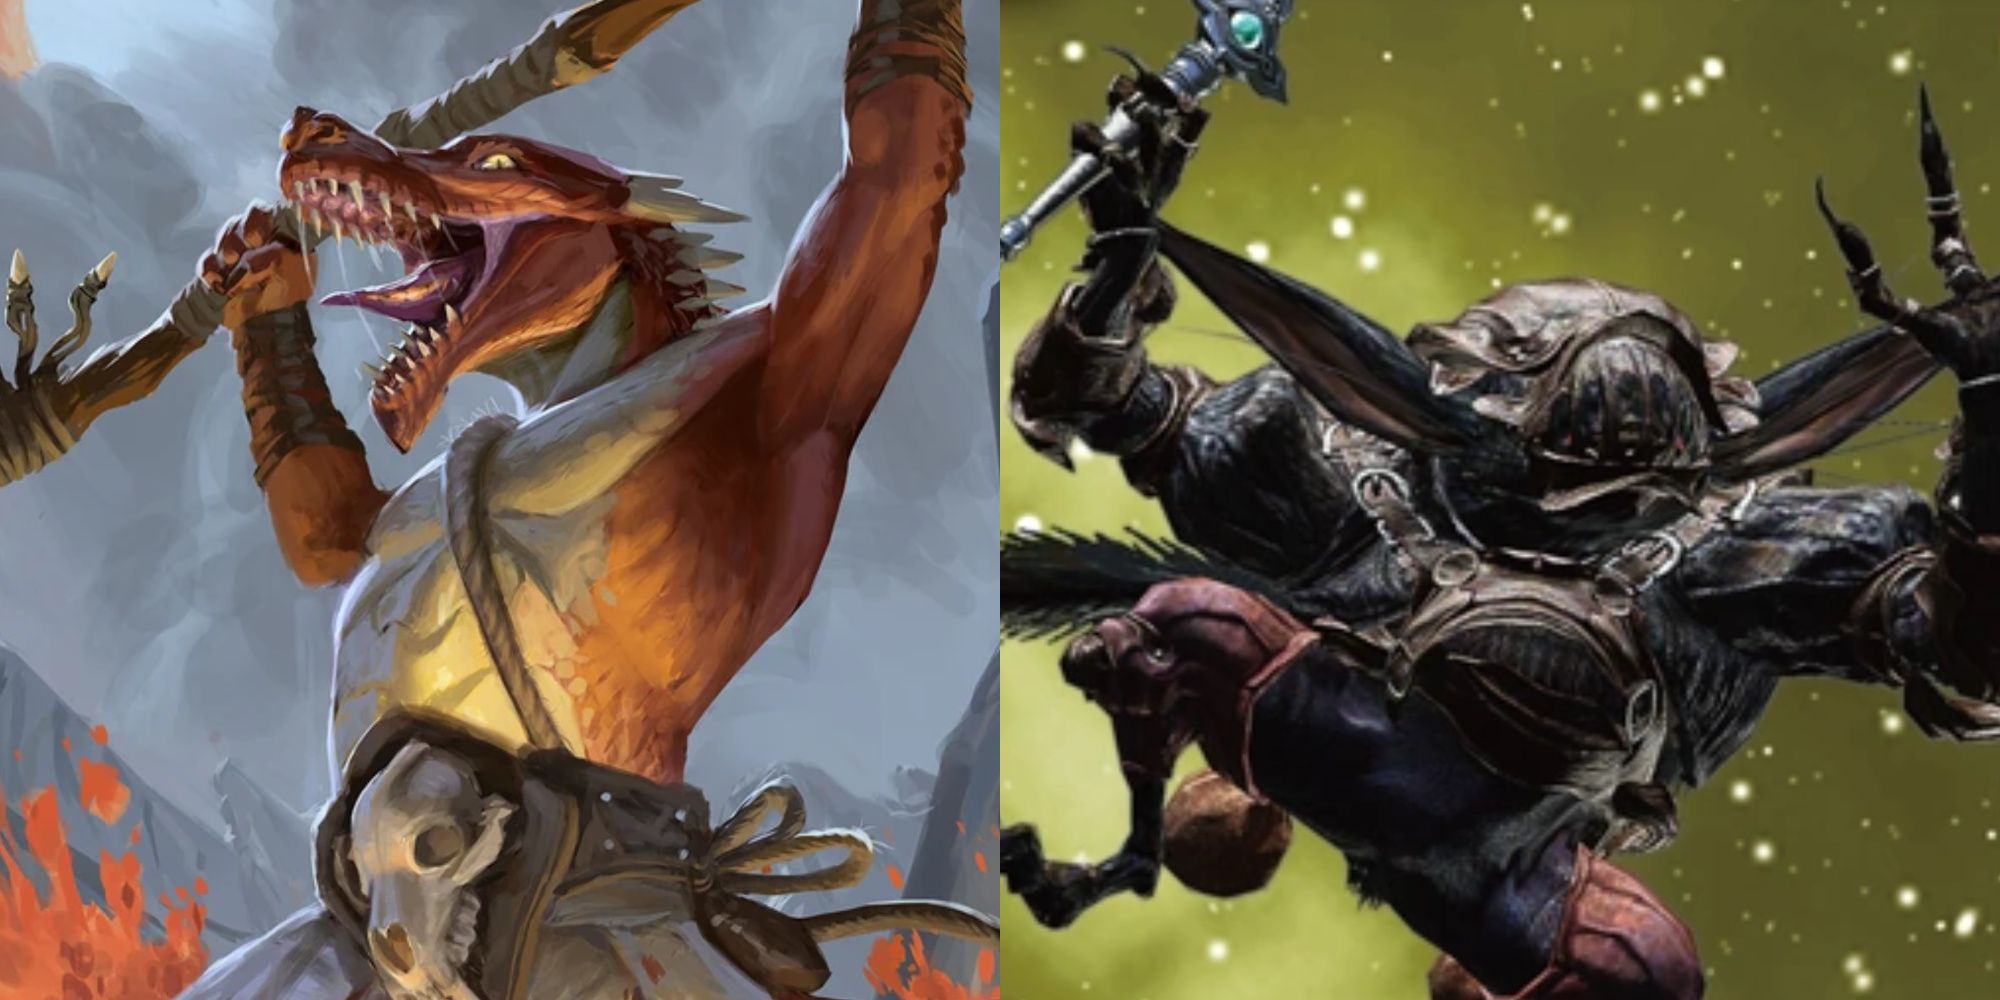 dungeons & dragons and final fantasy shared creatures featured image with D&D kobold and final fantasy 14 kobold